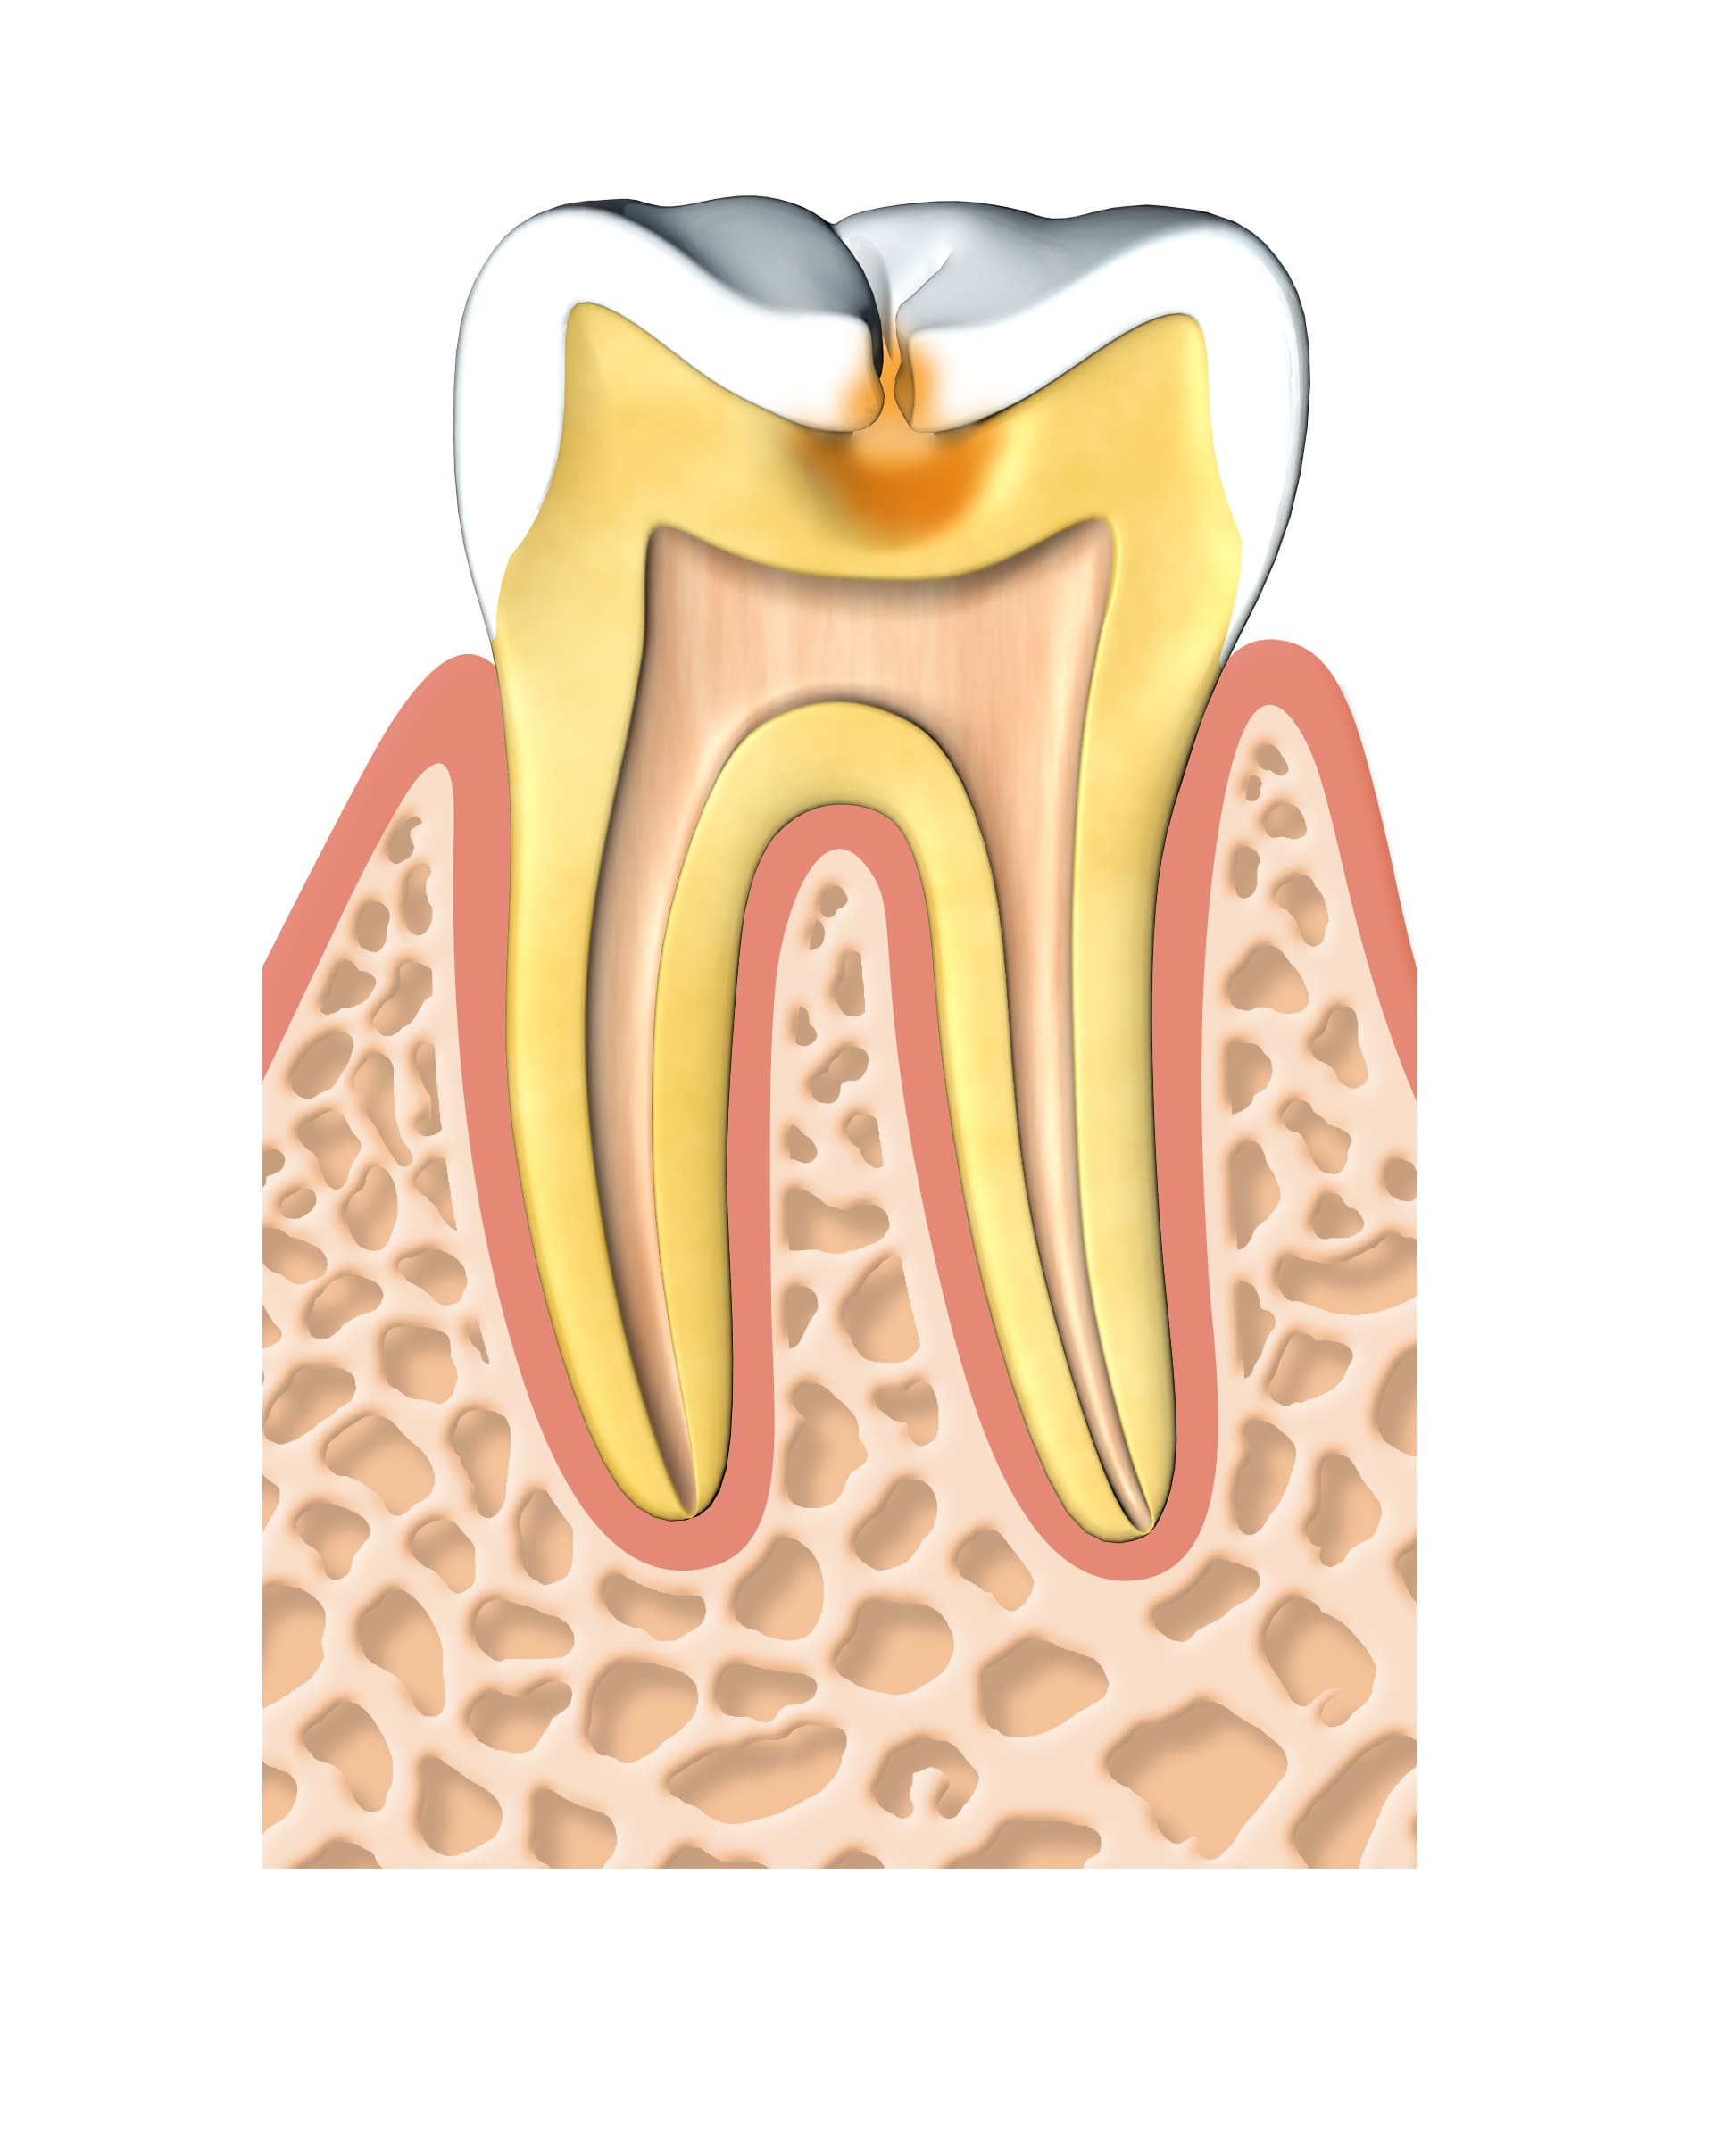 Root Canal Treatment in Singapore, Root Canal Treatment Cost Singapore